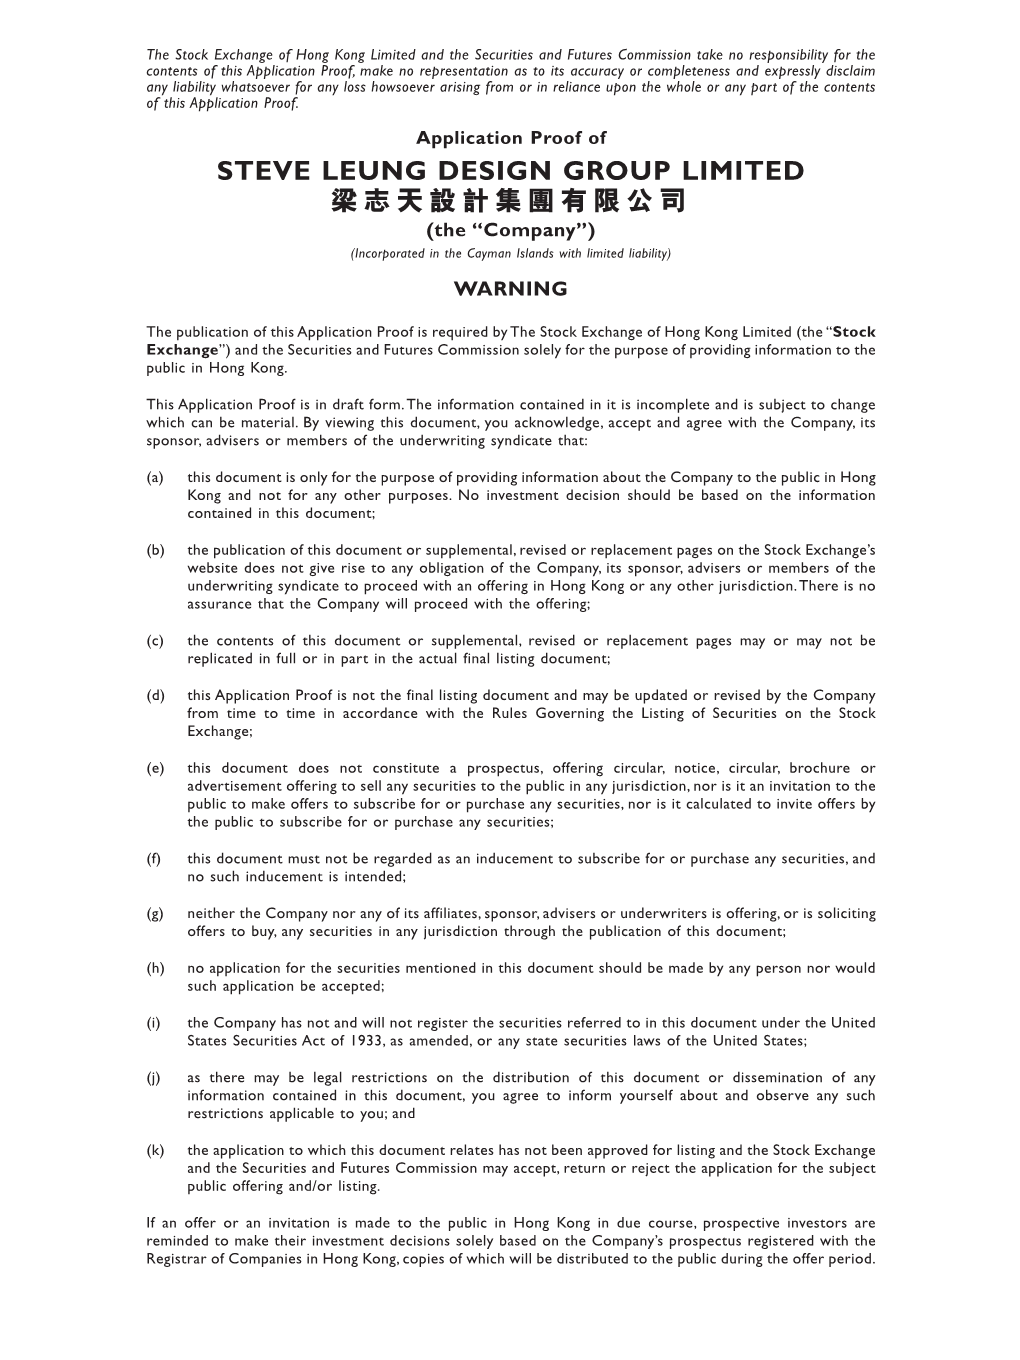 STEVE LEUNG DESIGN GROUP LIMITED 梁志天設計集團有限公司 (The “Company”) (Incorporated in the Cayman Islands with Limited Liability) WARNING